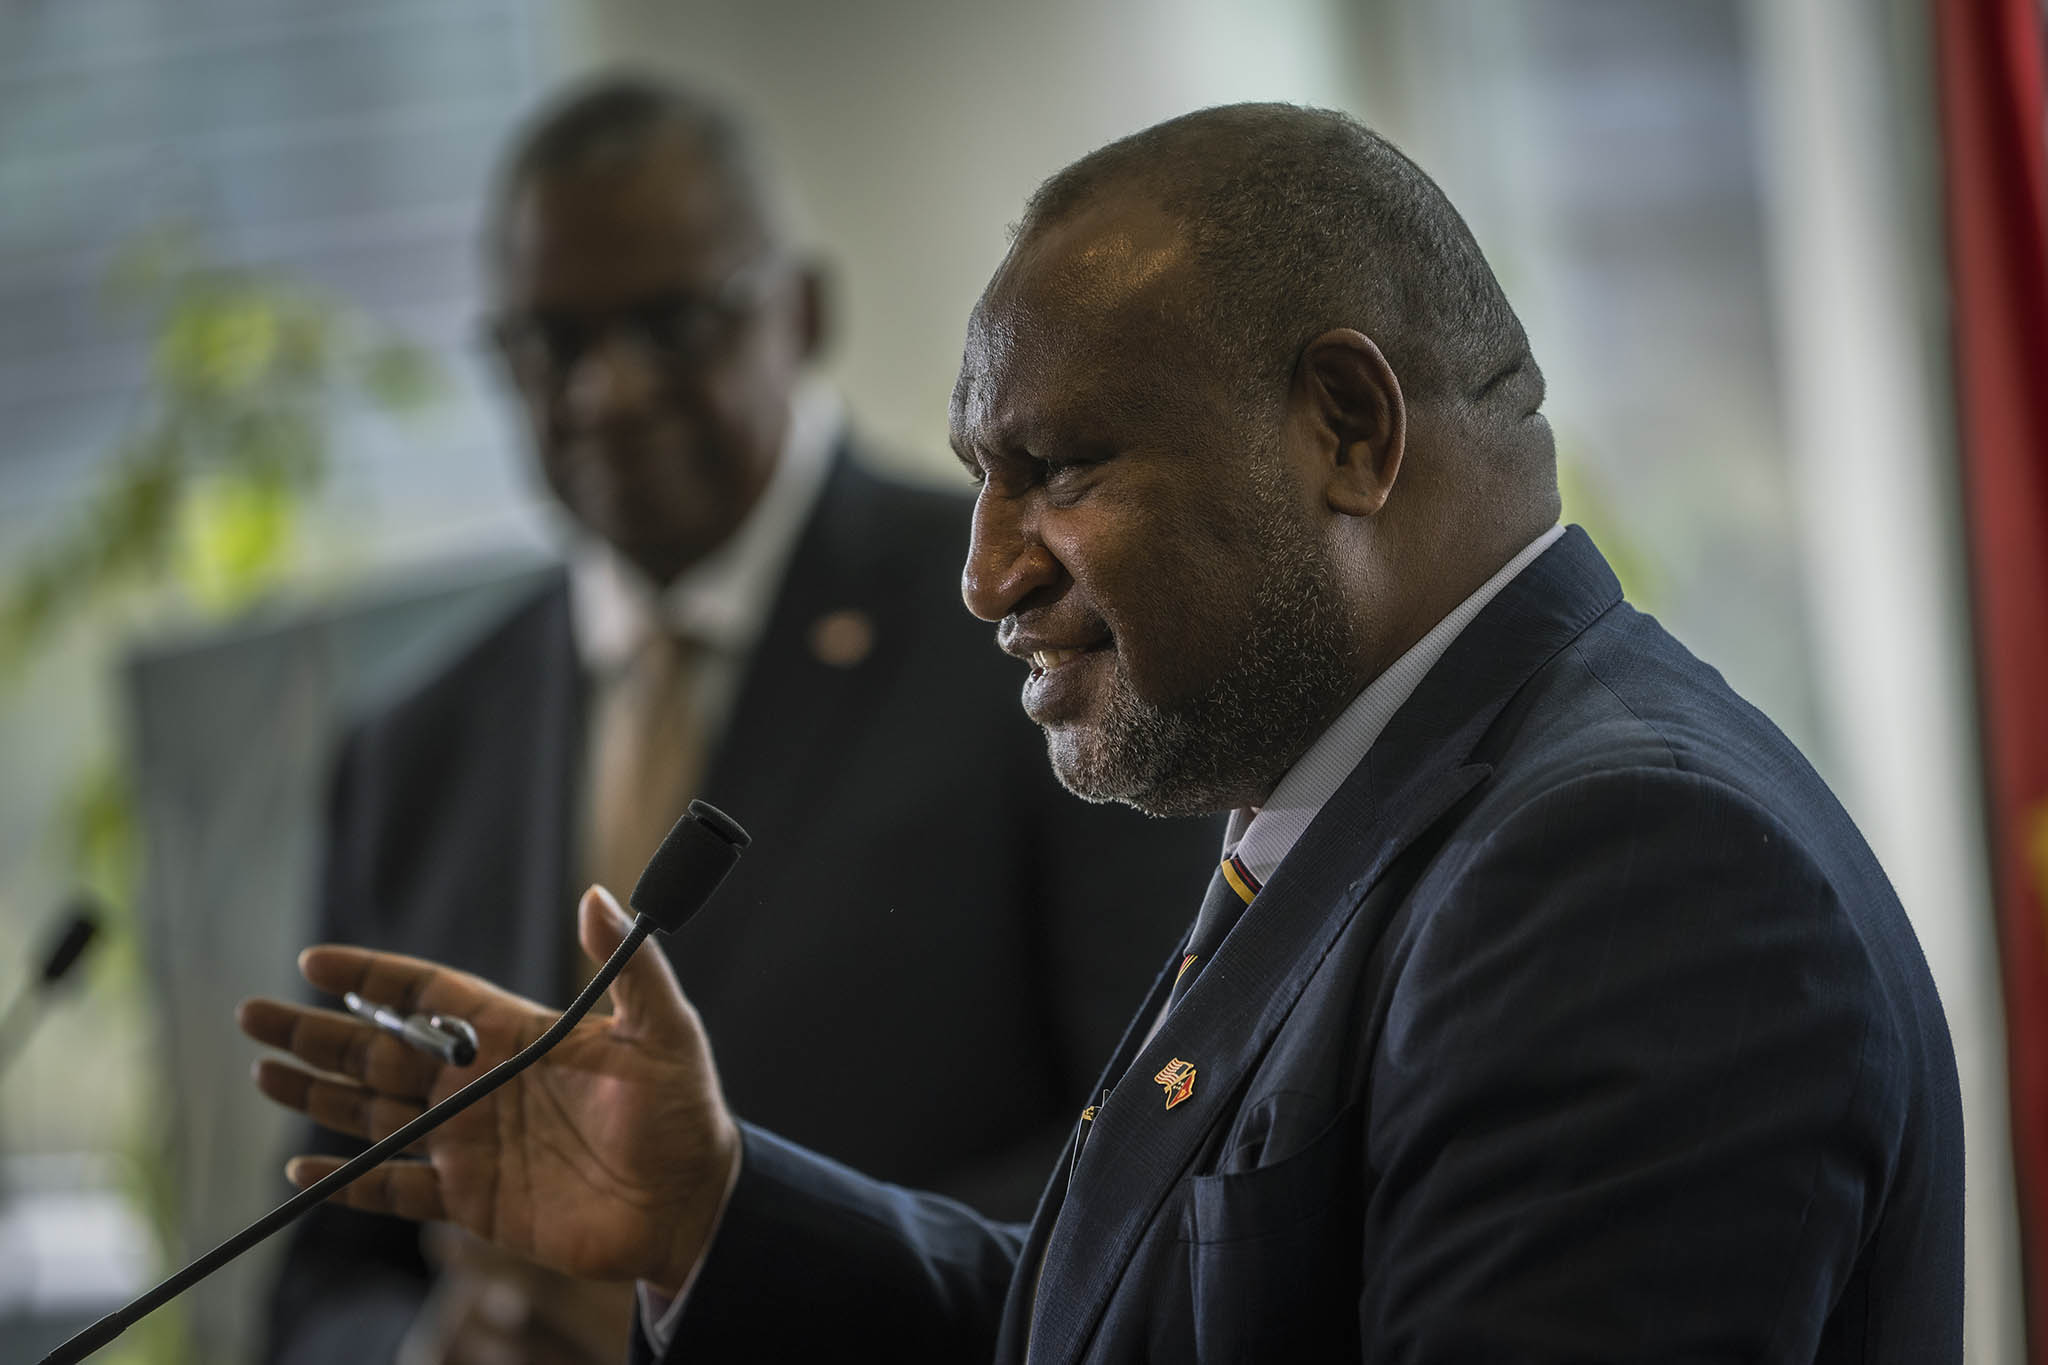 Papua New Guinea’s prime minister, James Marape meets reporters last year with U.S. Defense Secretary Lloyd Austin, one of several top U.S. officials to visit amid a growing U.S. focus on the country. (Chad J. McNeeley/Defense Department)